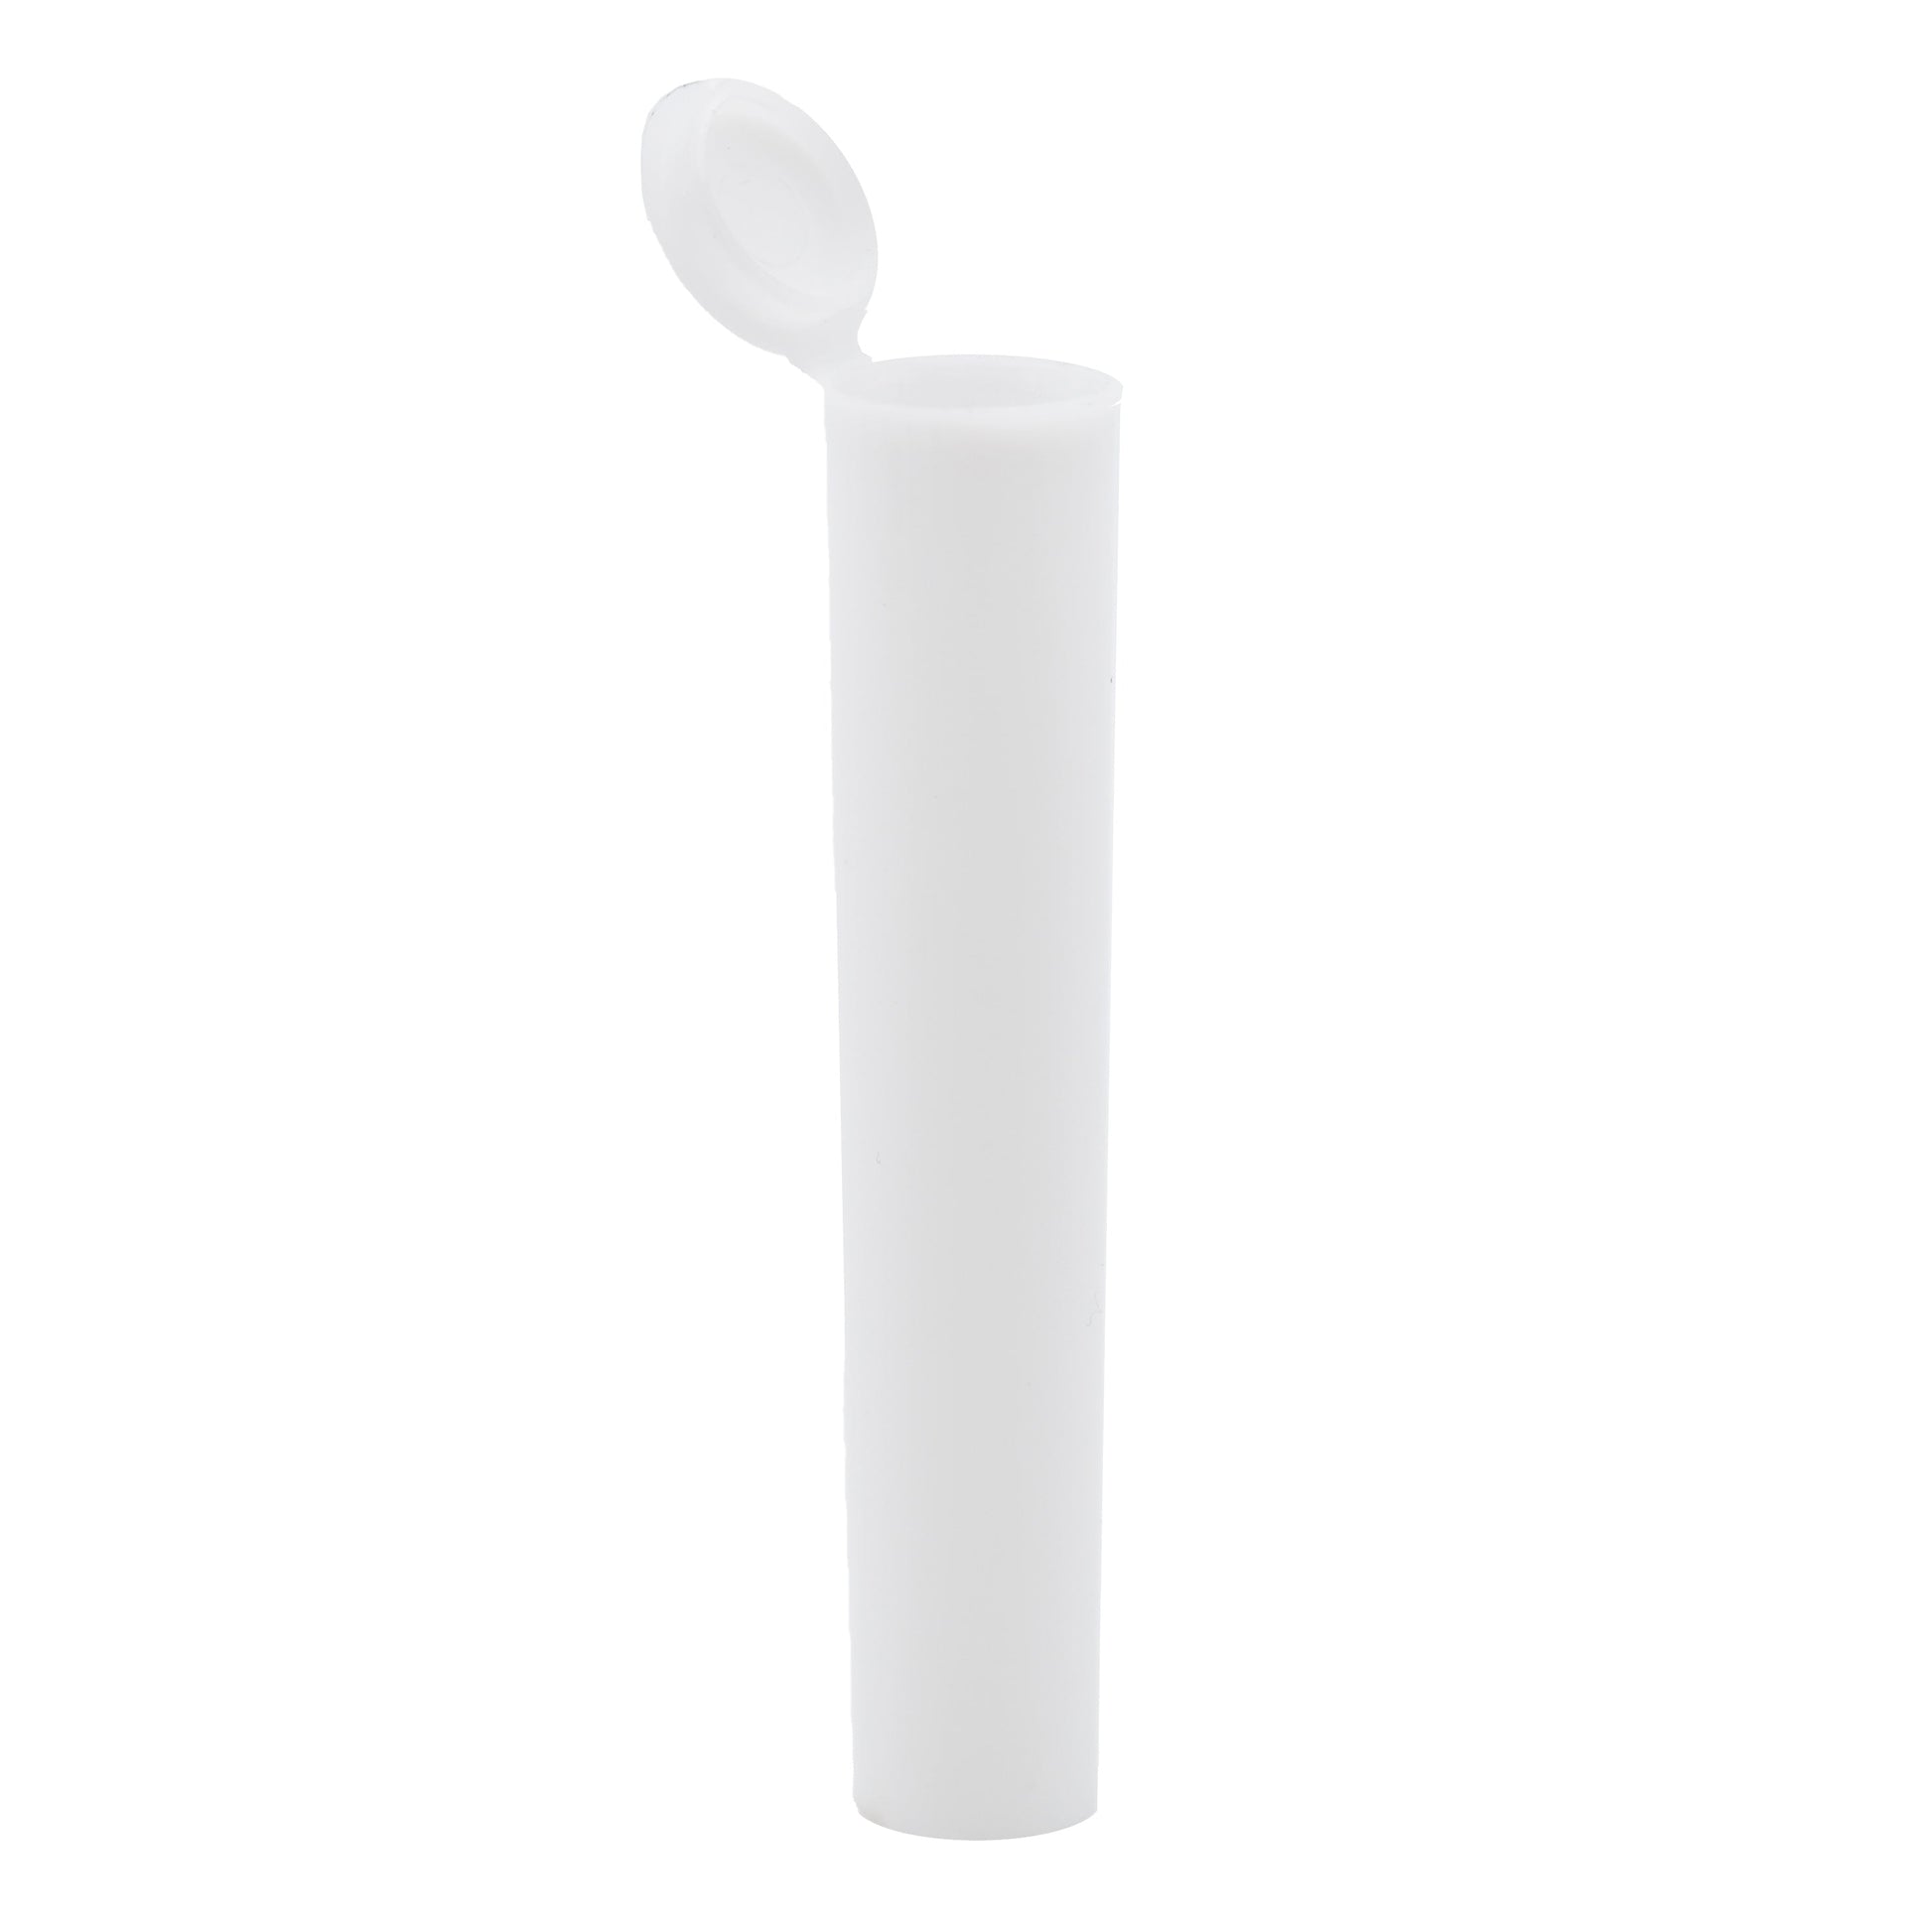 Grand Puff Squeeze Pop Top Plastic Tube (80mm) White